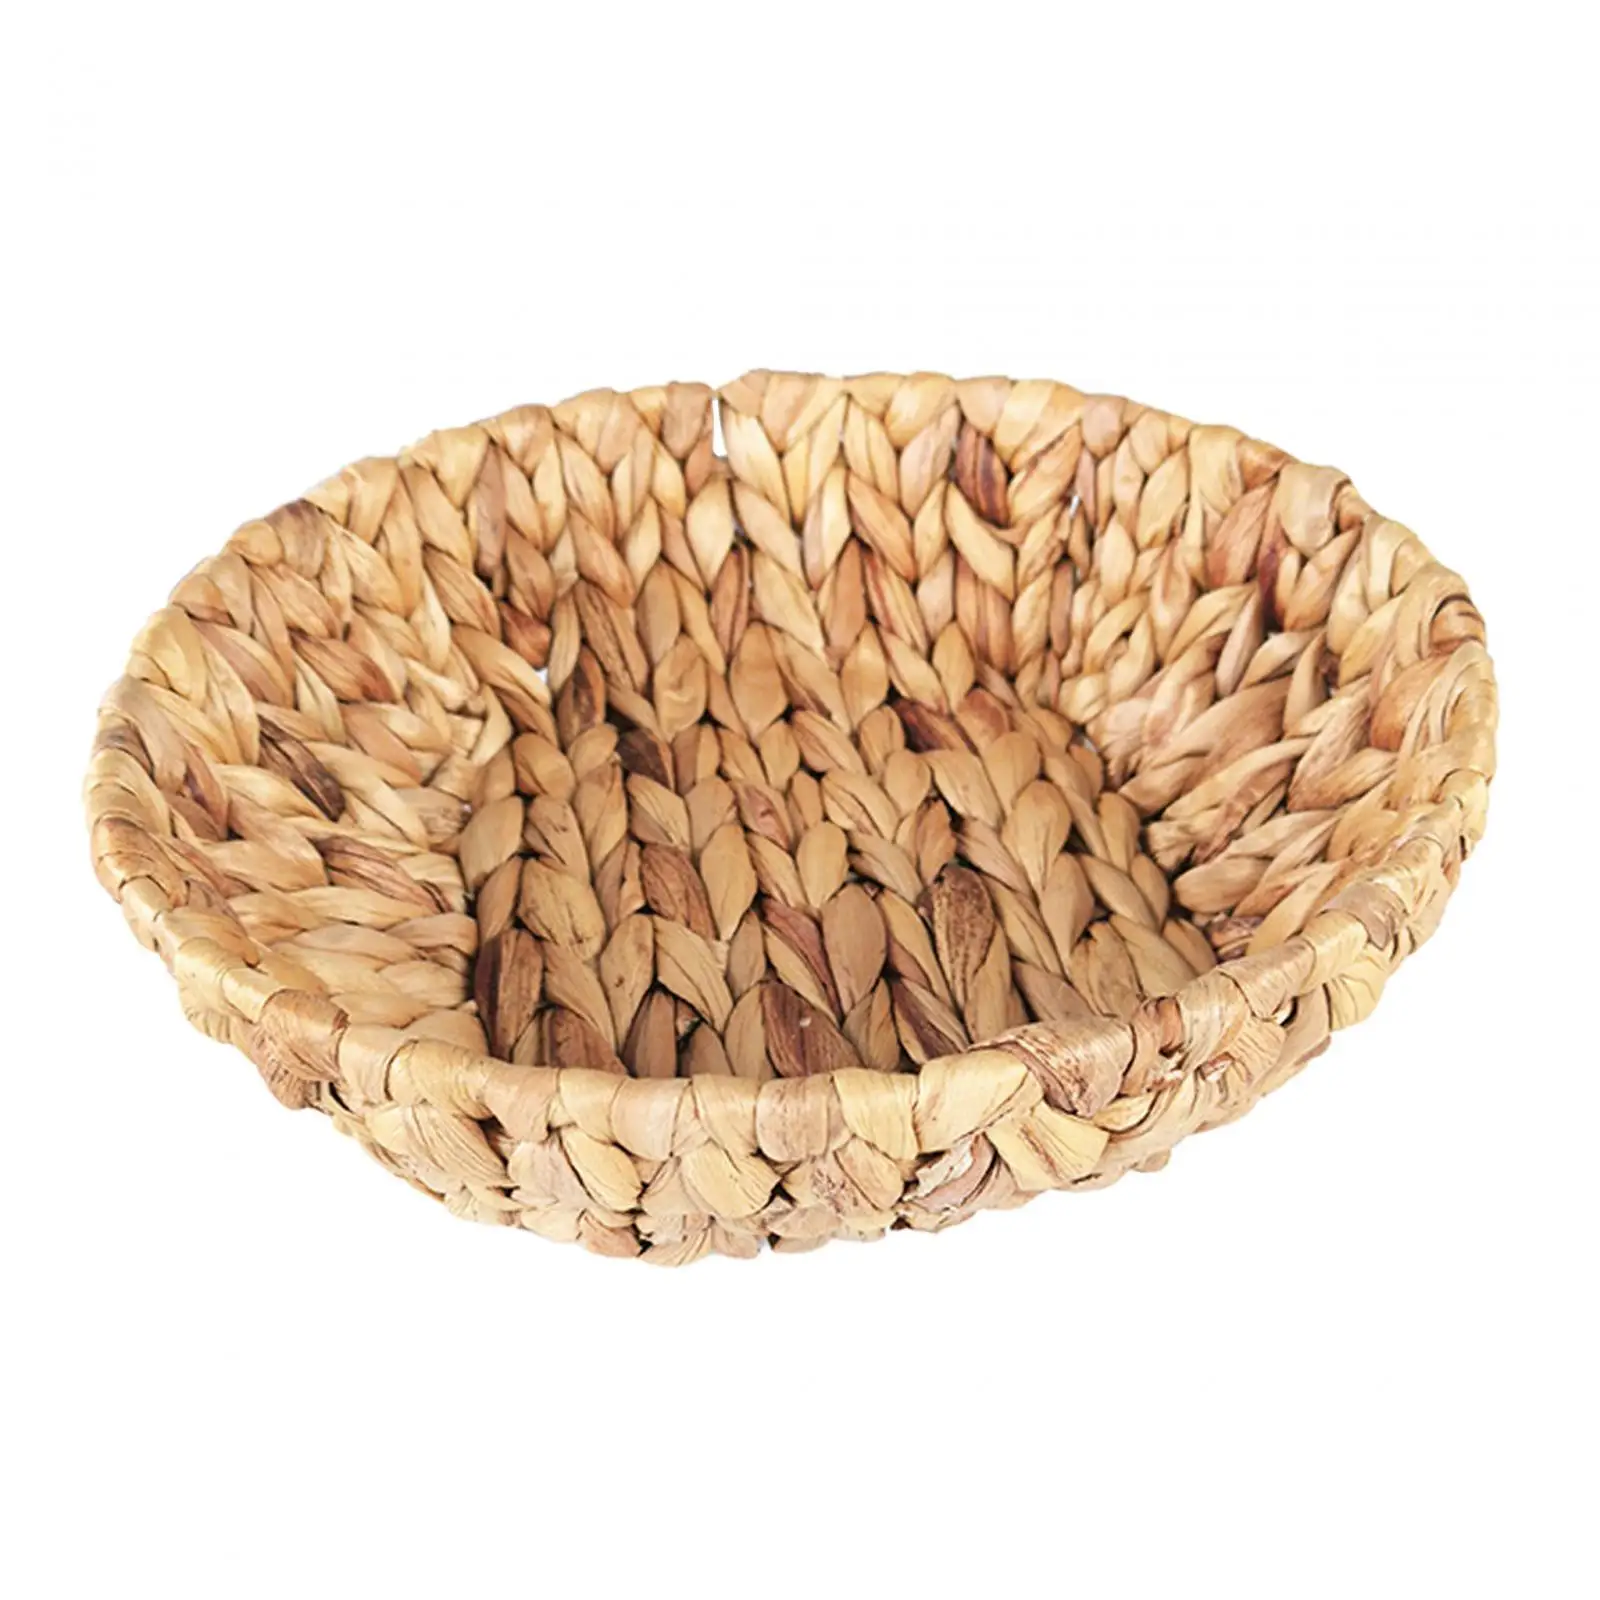 Water Hyacinth Storage Basket Home Decorative Wicker Serving Tray for Tea Party Dinner Coffee Table Fruit Arts and Crafts